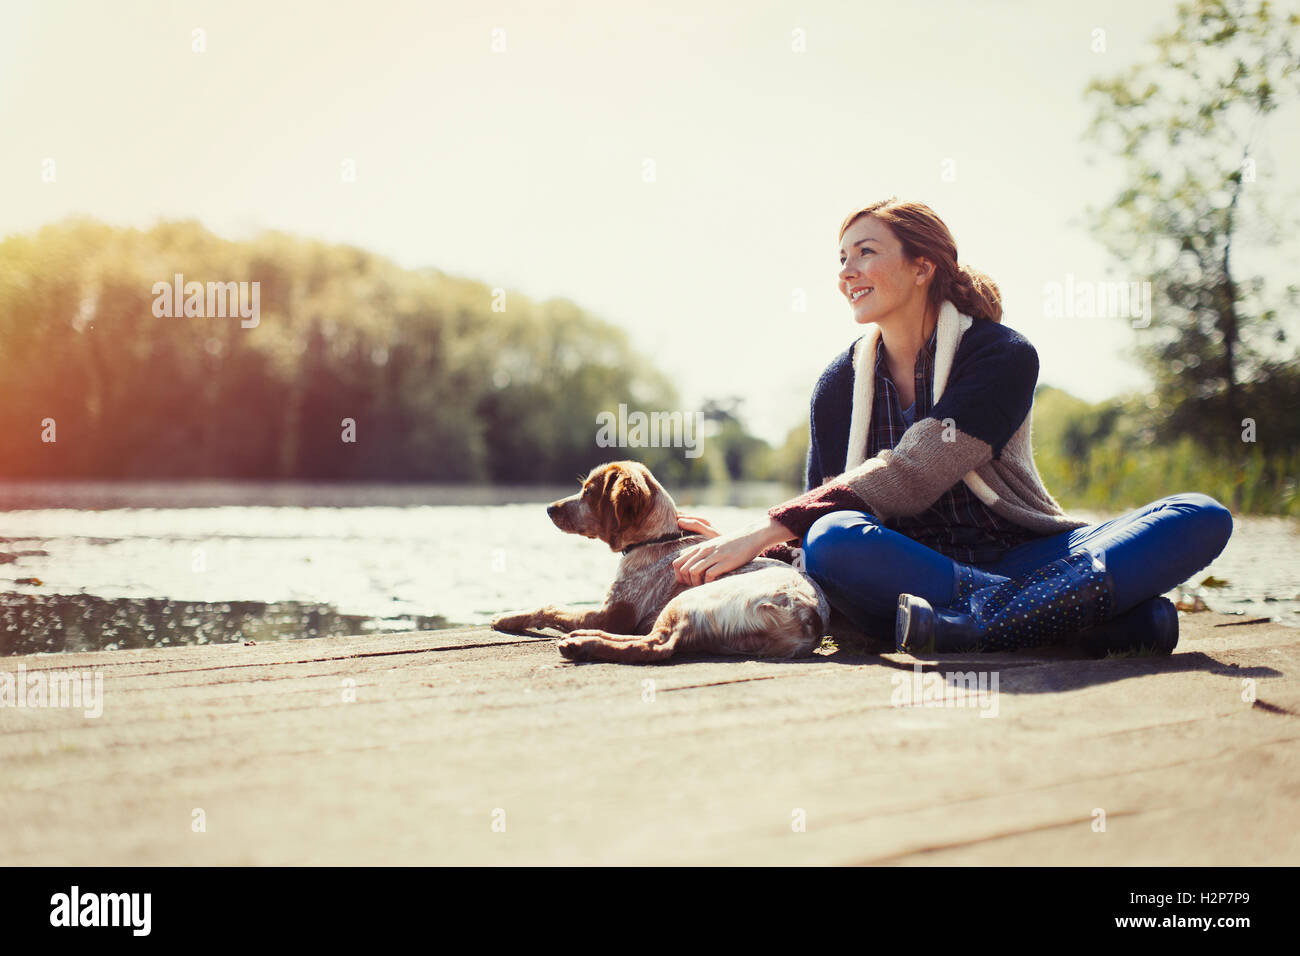 Smiling woman and dog relaxing on sunny lakeside dock Stock Photo